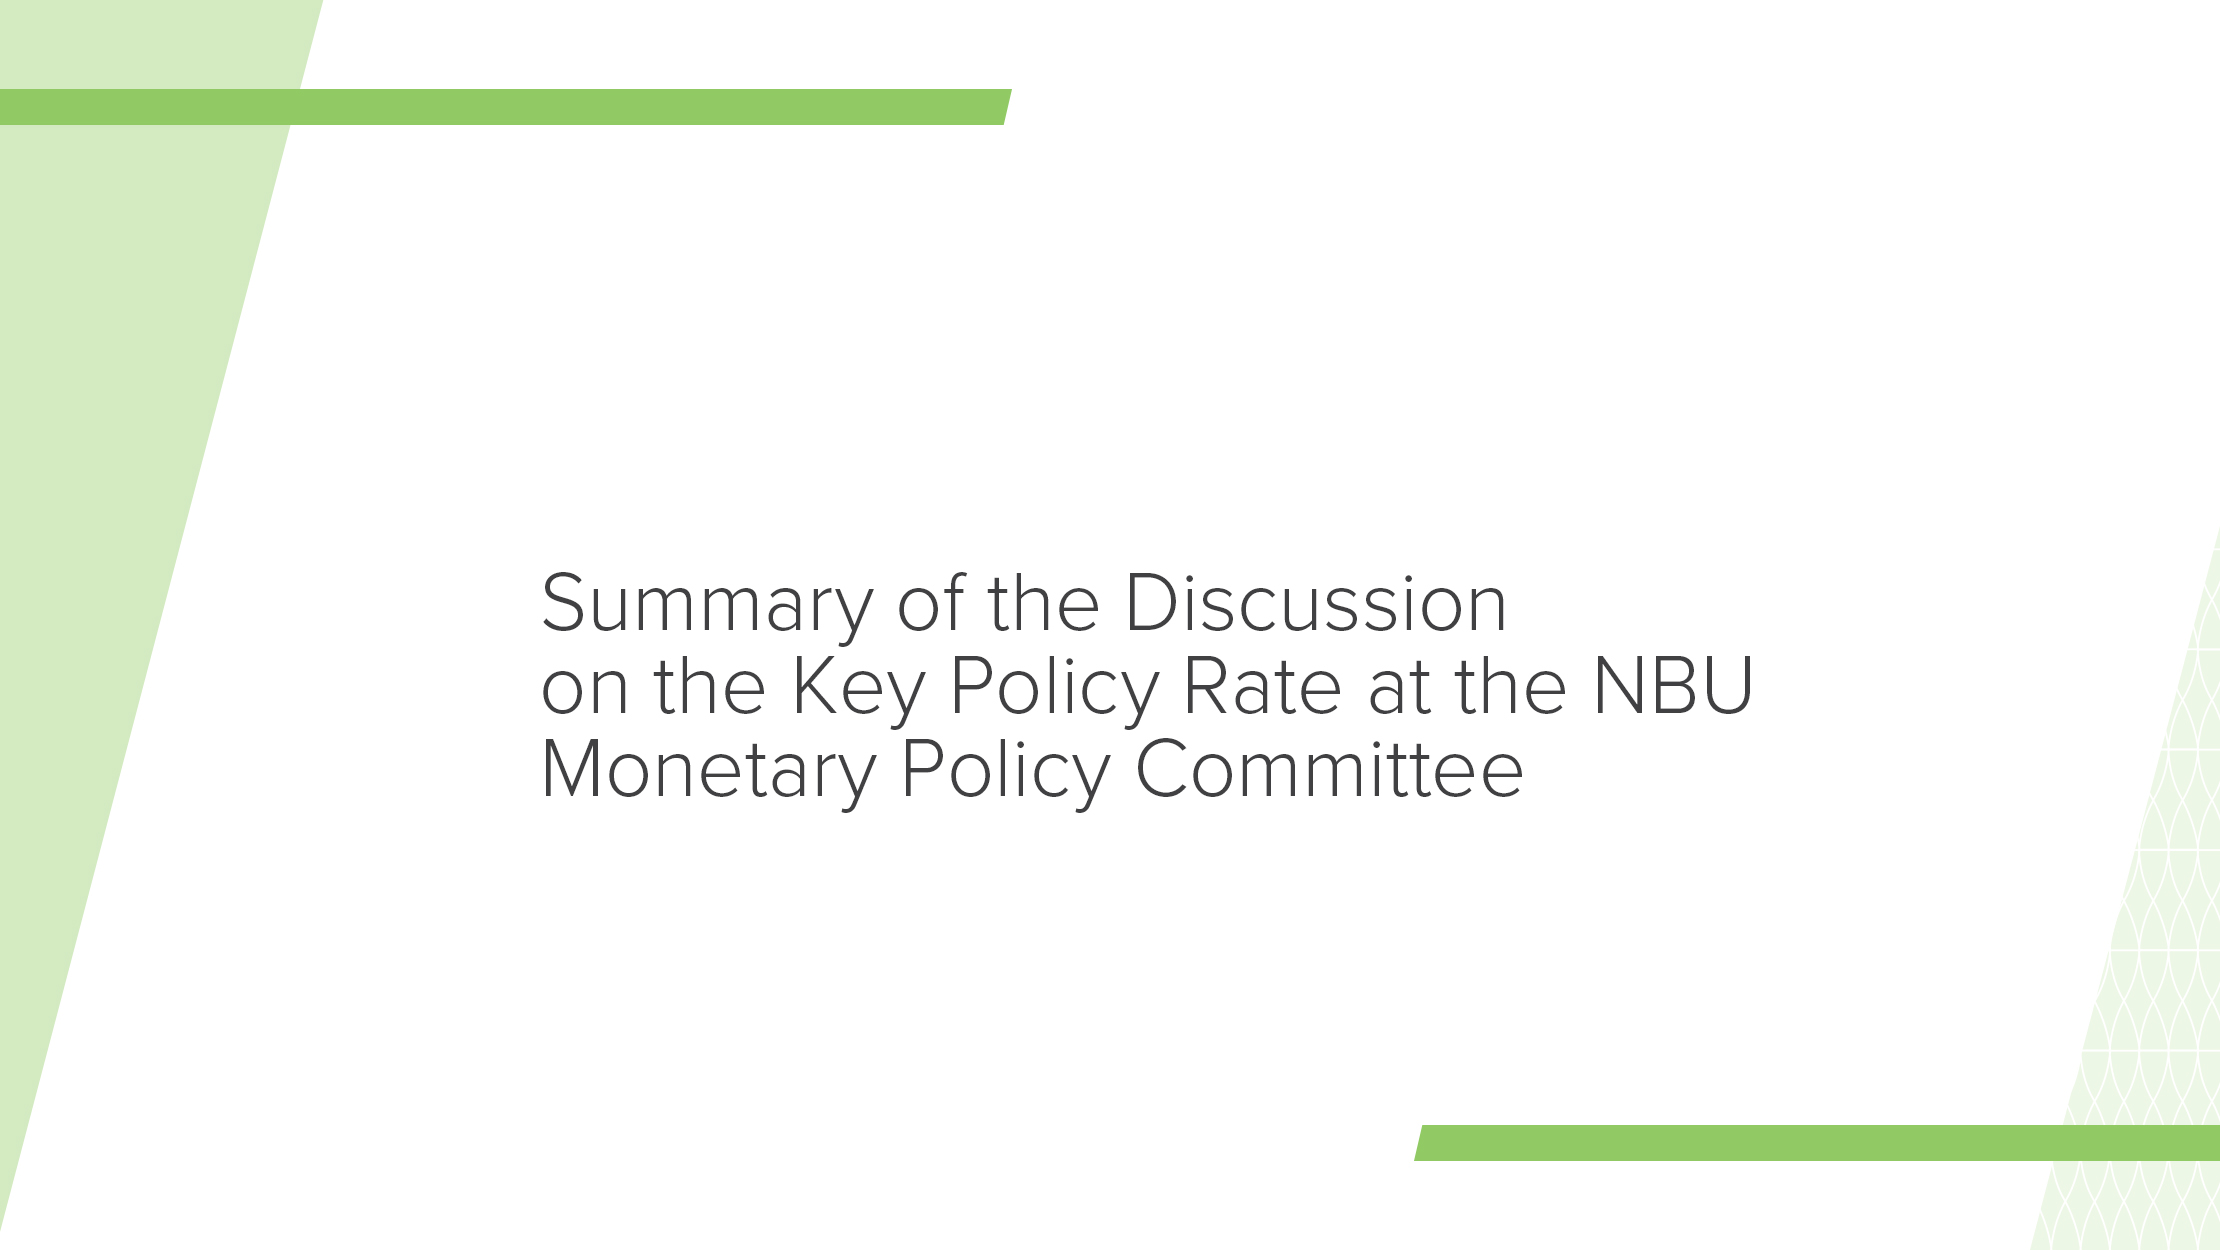 Summary of Key Policy Rate Discussion by NBU Monetary Policy Committee on 19 January 2022